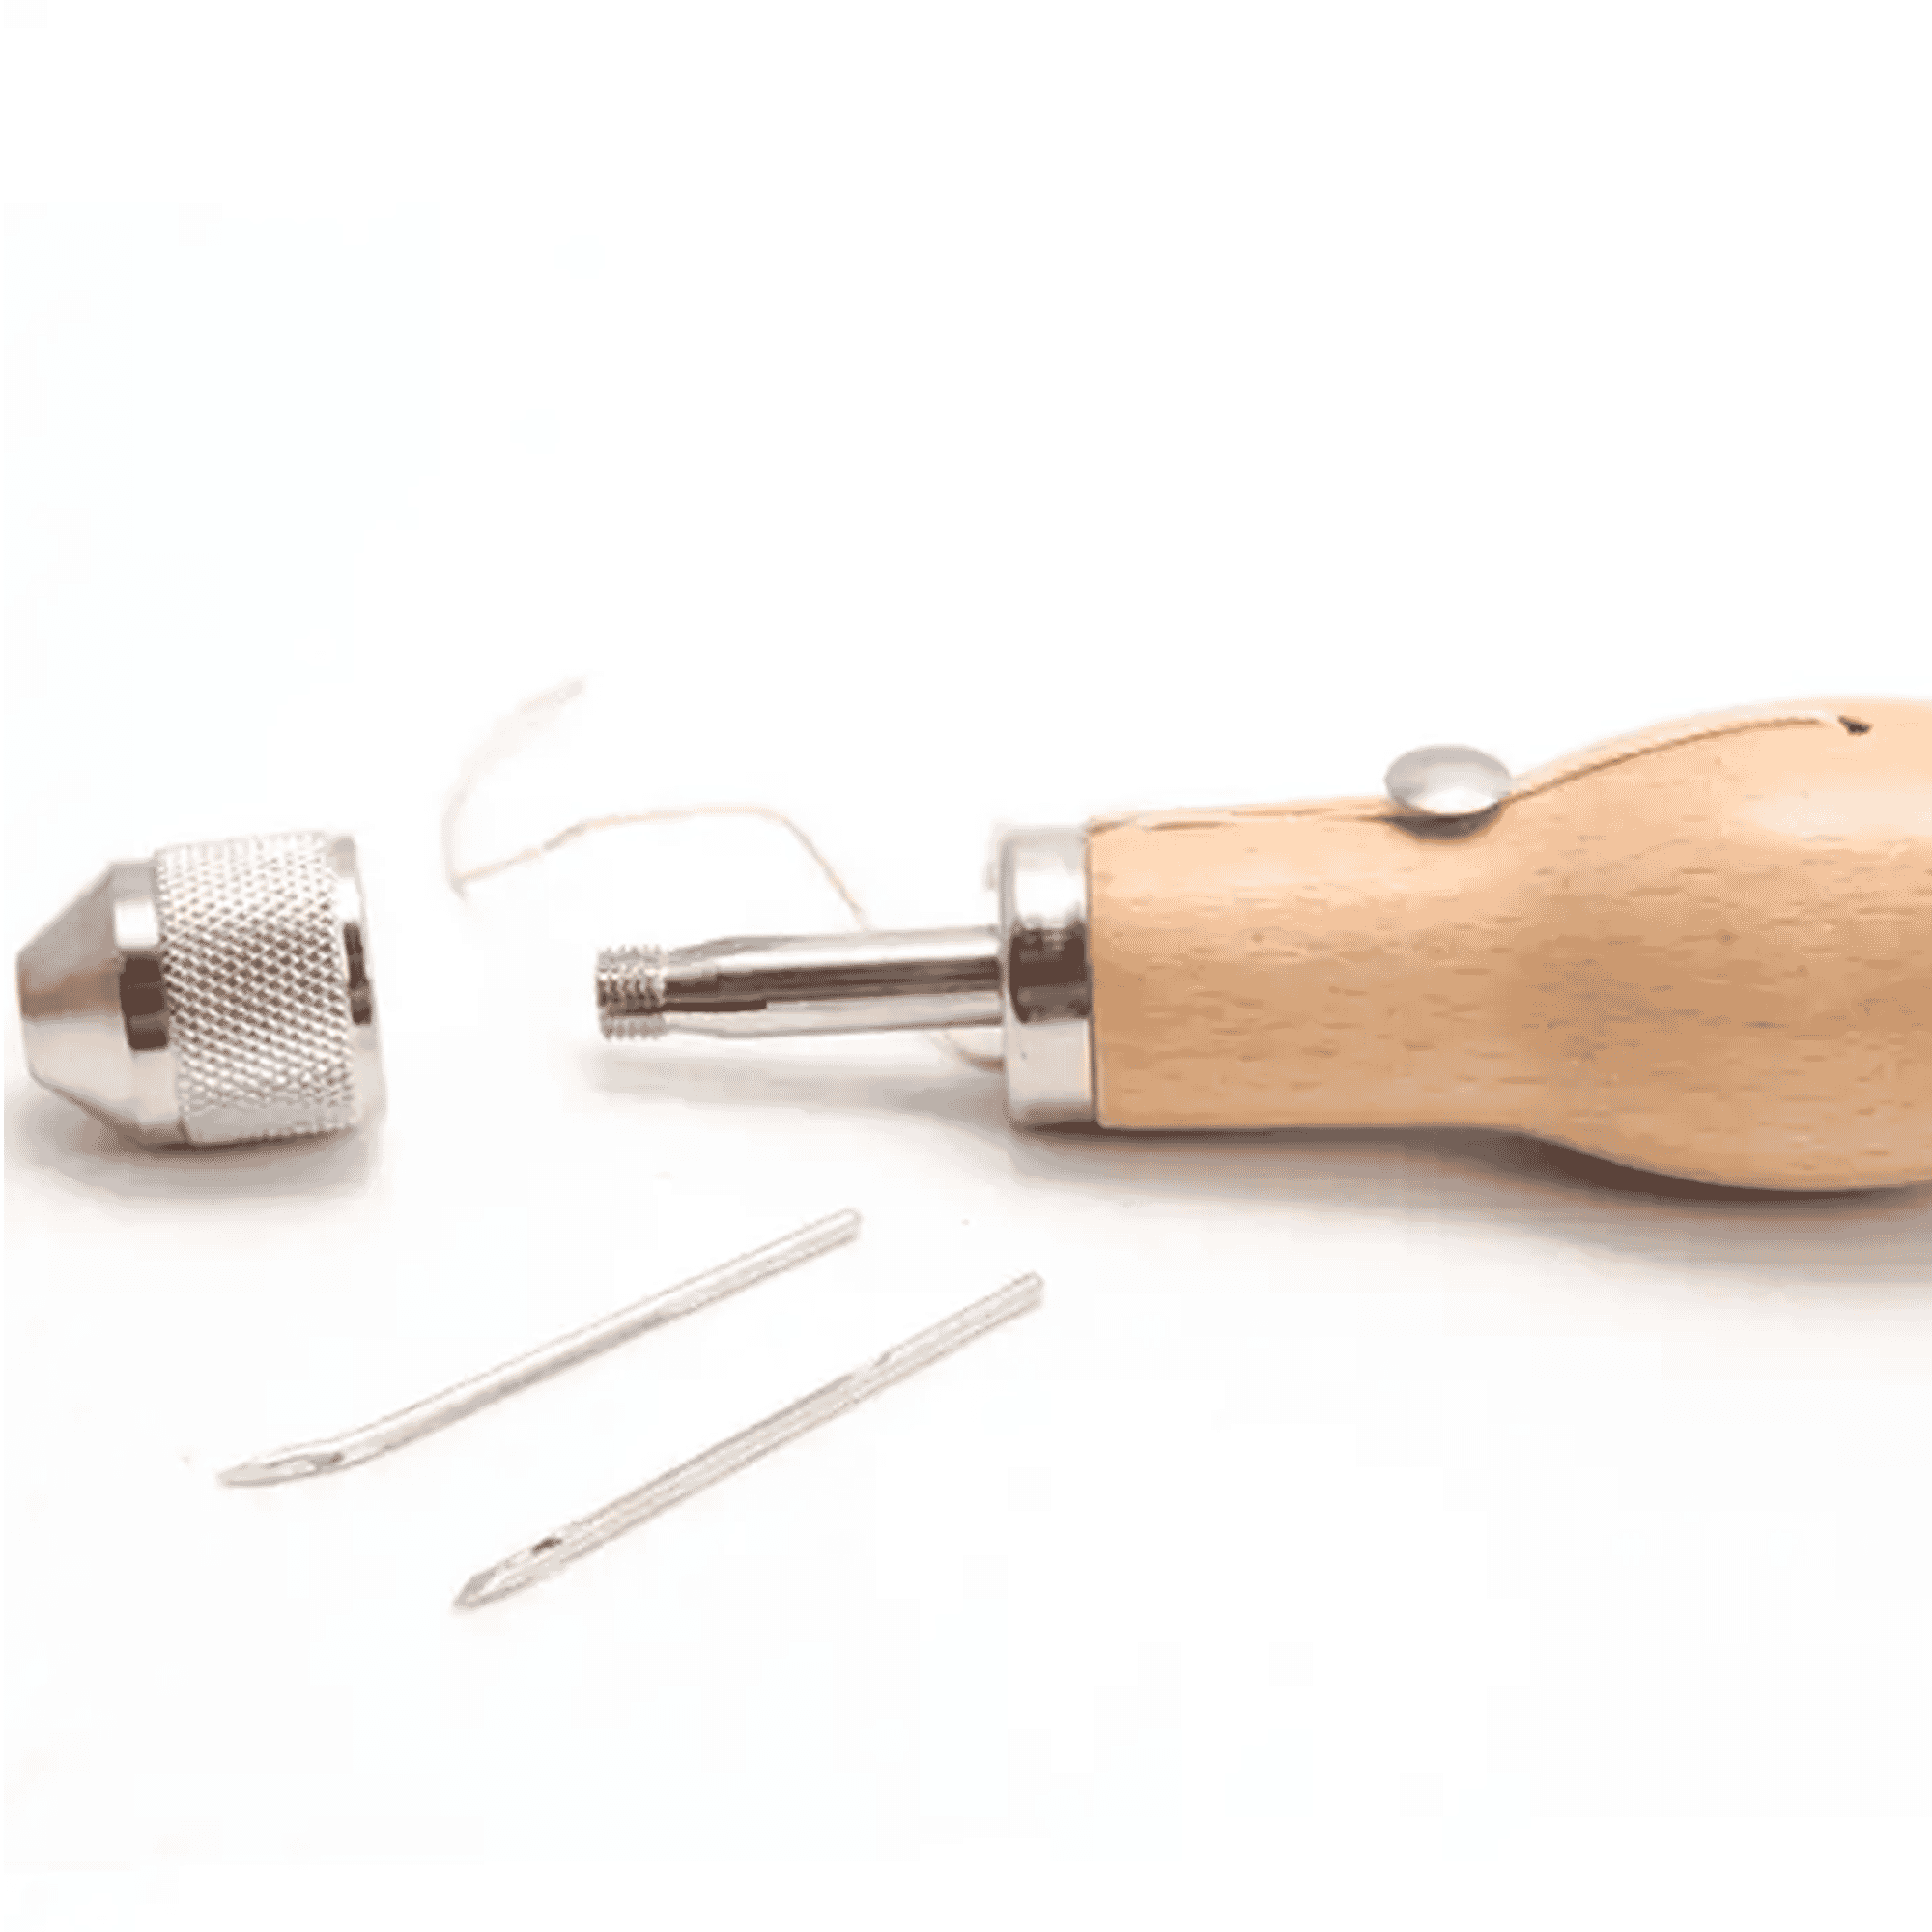 Leathercraft Sewing Tool Stitcher Lockstitch Leather Sewing Awl Kit, with Straight and Curved Needle, to Sew and Repair Leather